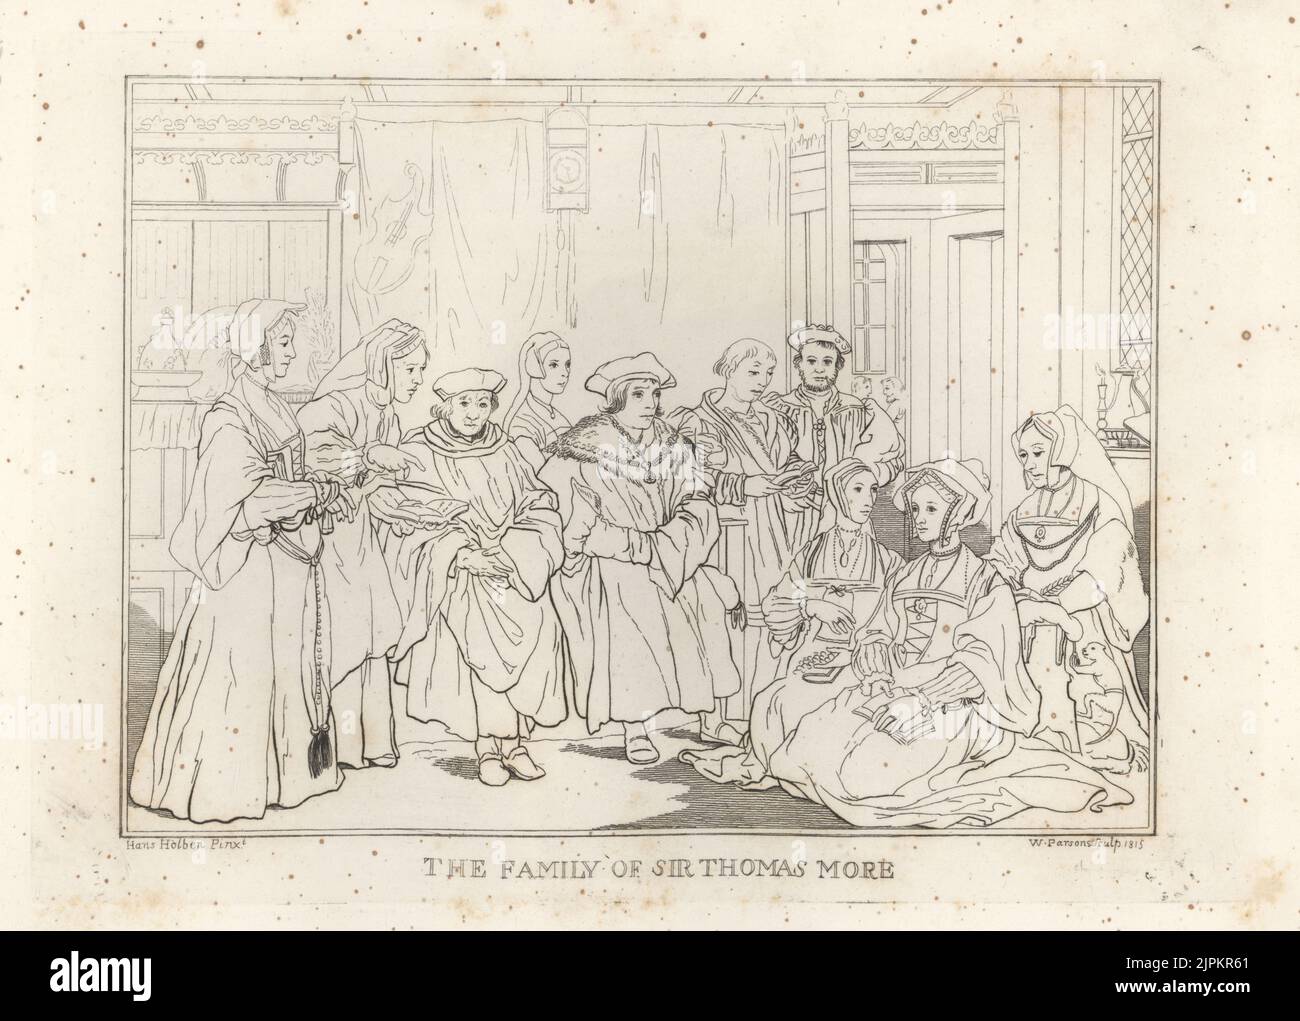 The Family of Sir Thomas More, Lord Chancellor, 1478-1535. L-R: Elizabeth Dauncey, Margaret Clements, Sir John More, Ann More, Sir Thomas More, John More, Henry Patenson, Cecily Heron, Margaret Roper, and Alice More. From the scarce print by Hans Holbein, engraved by W. Parsons. Copperplate engraving from Samuel Woodburn’s Gallery of Rare Portraits Consisting of Original Plates, George Jones, 102 St Martin’s Lane, London, 1816. Stock Photo